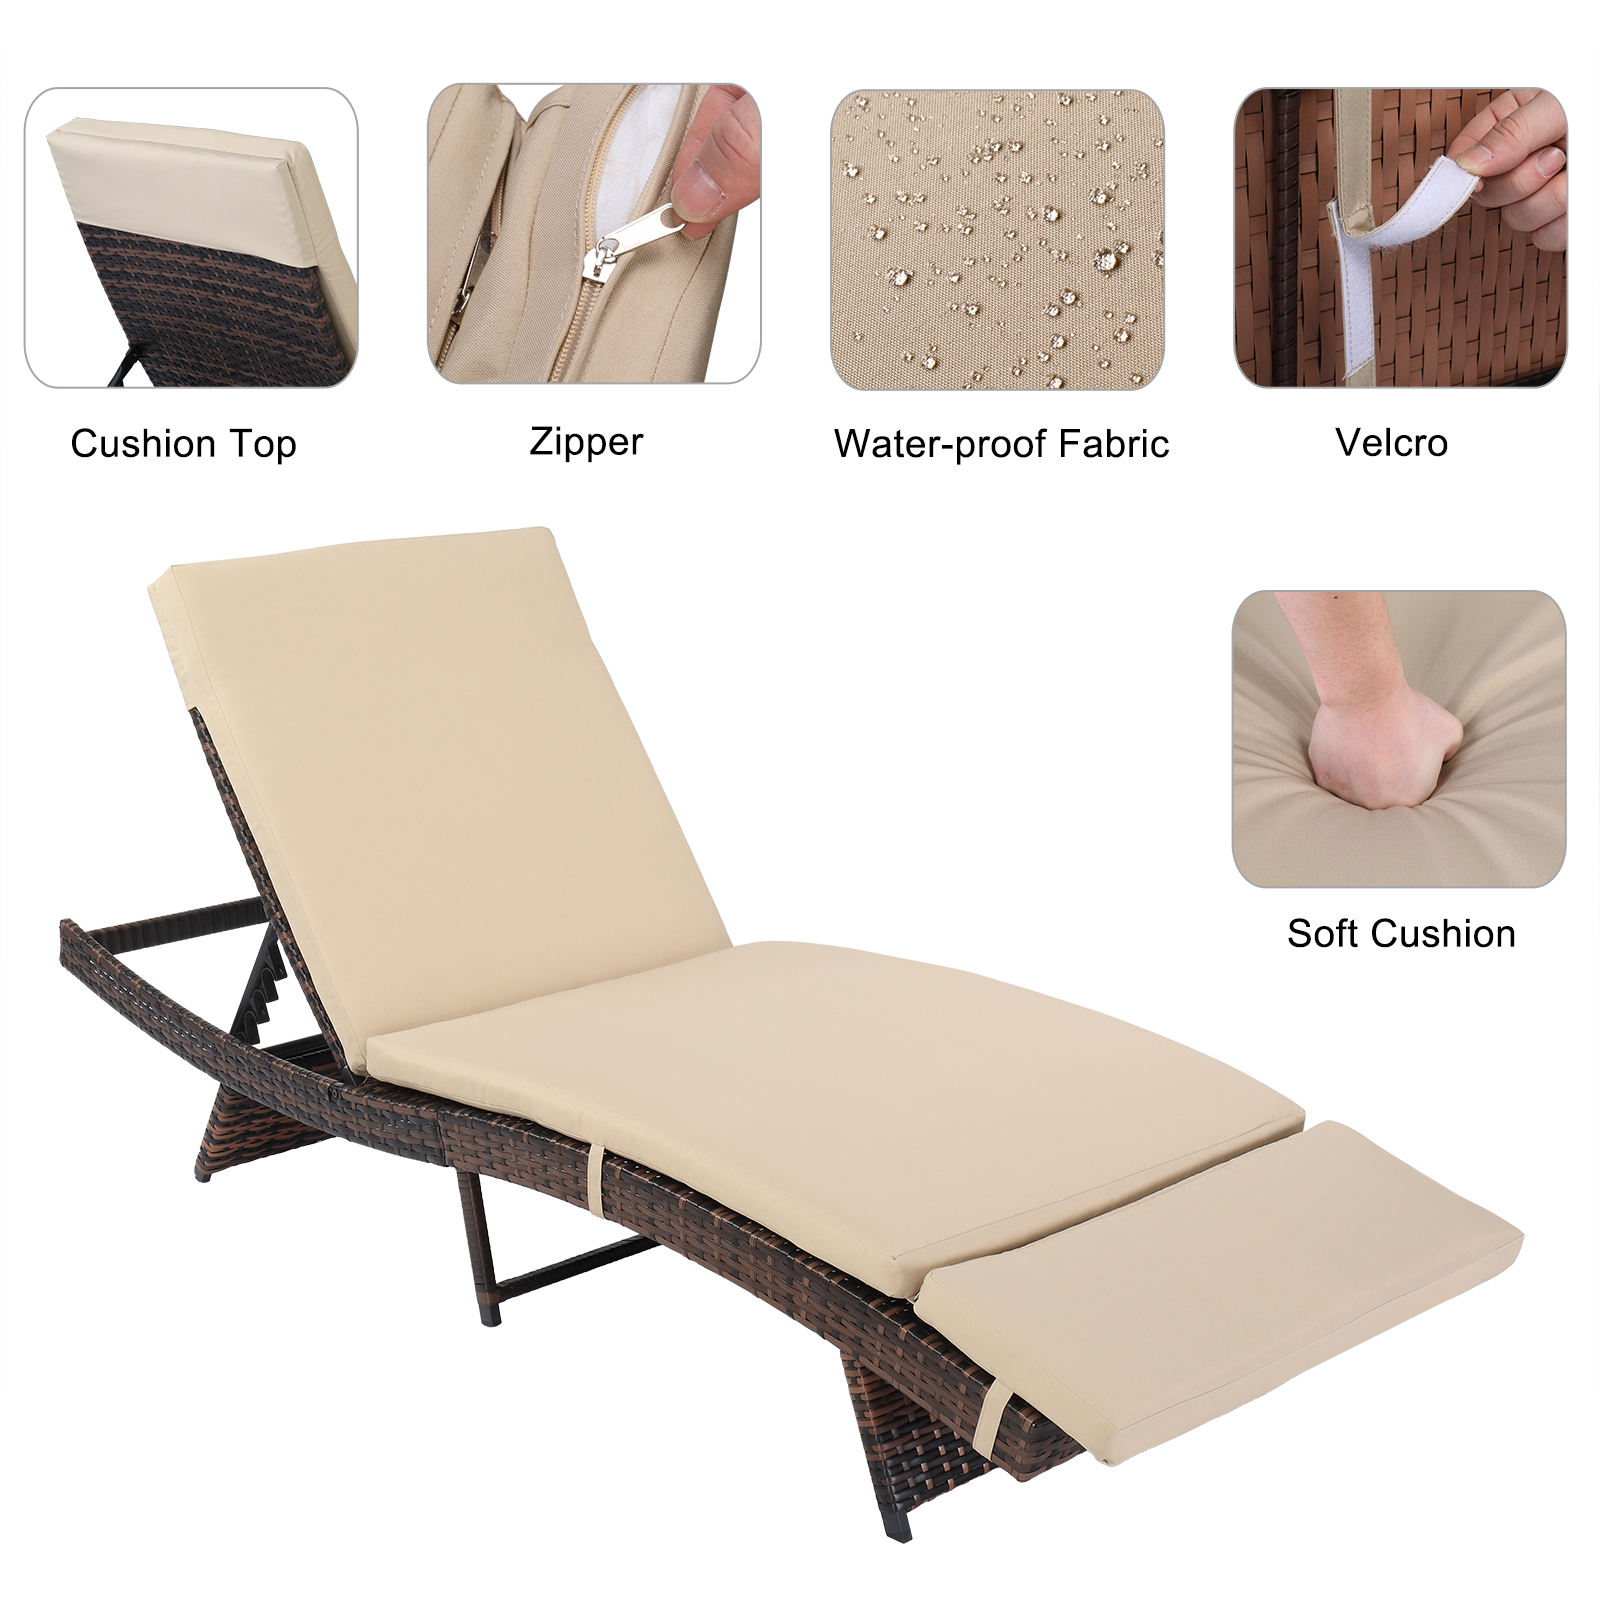 uhomepro Patio Rattan Lounge Chair Chaise Recliner, Outdoor Patio Furniture Set for Pool, Reclining Rattan Lounge Chair Chaise Couch Cushioned with Adjustable Back, Beige - image 4 of 10